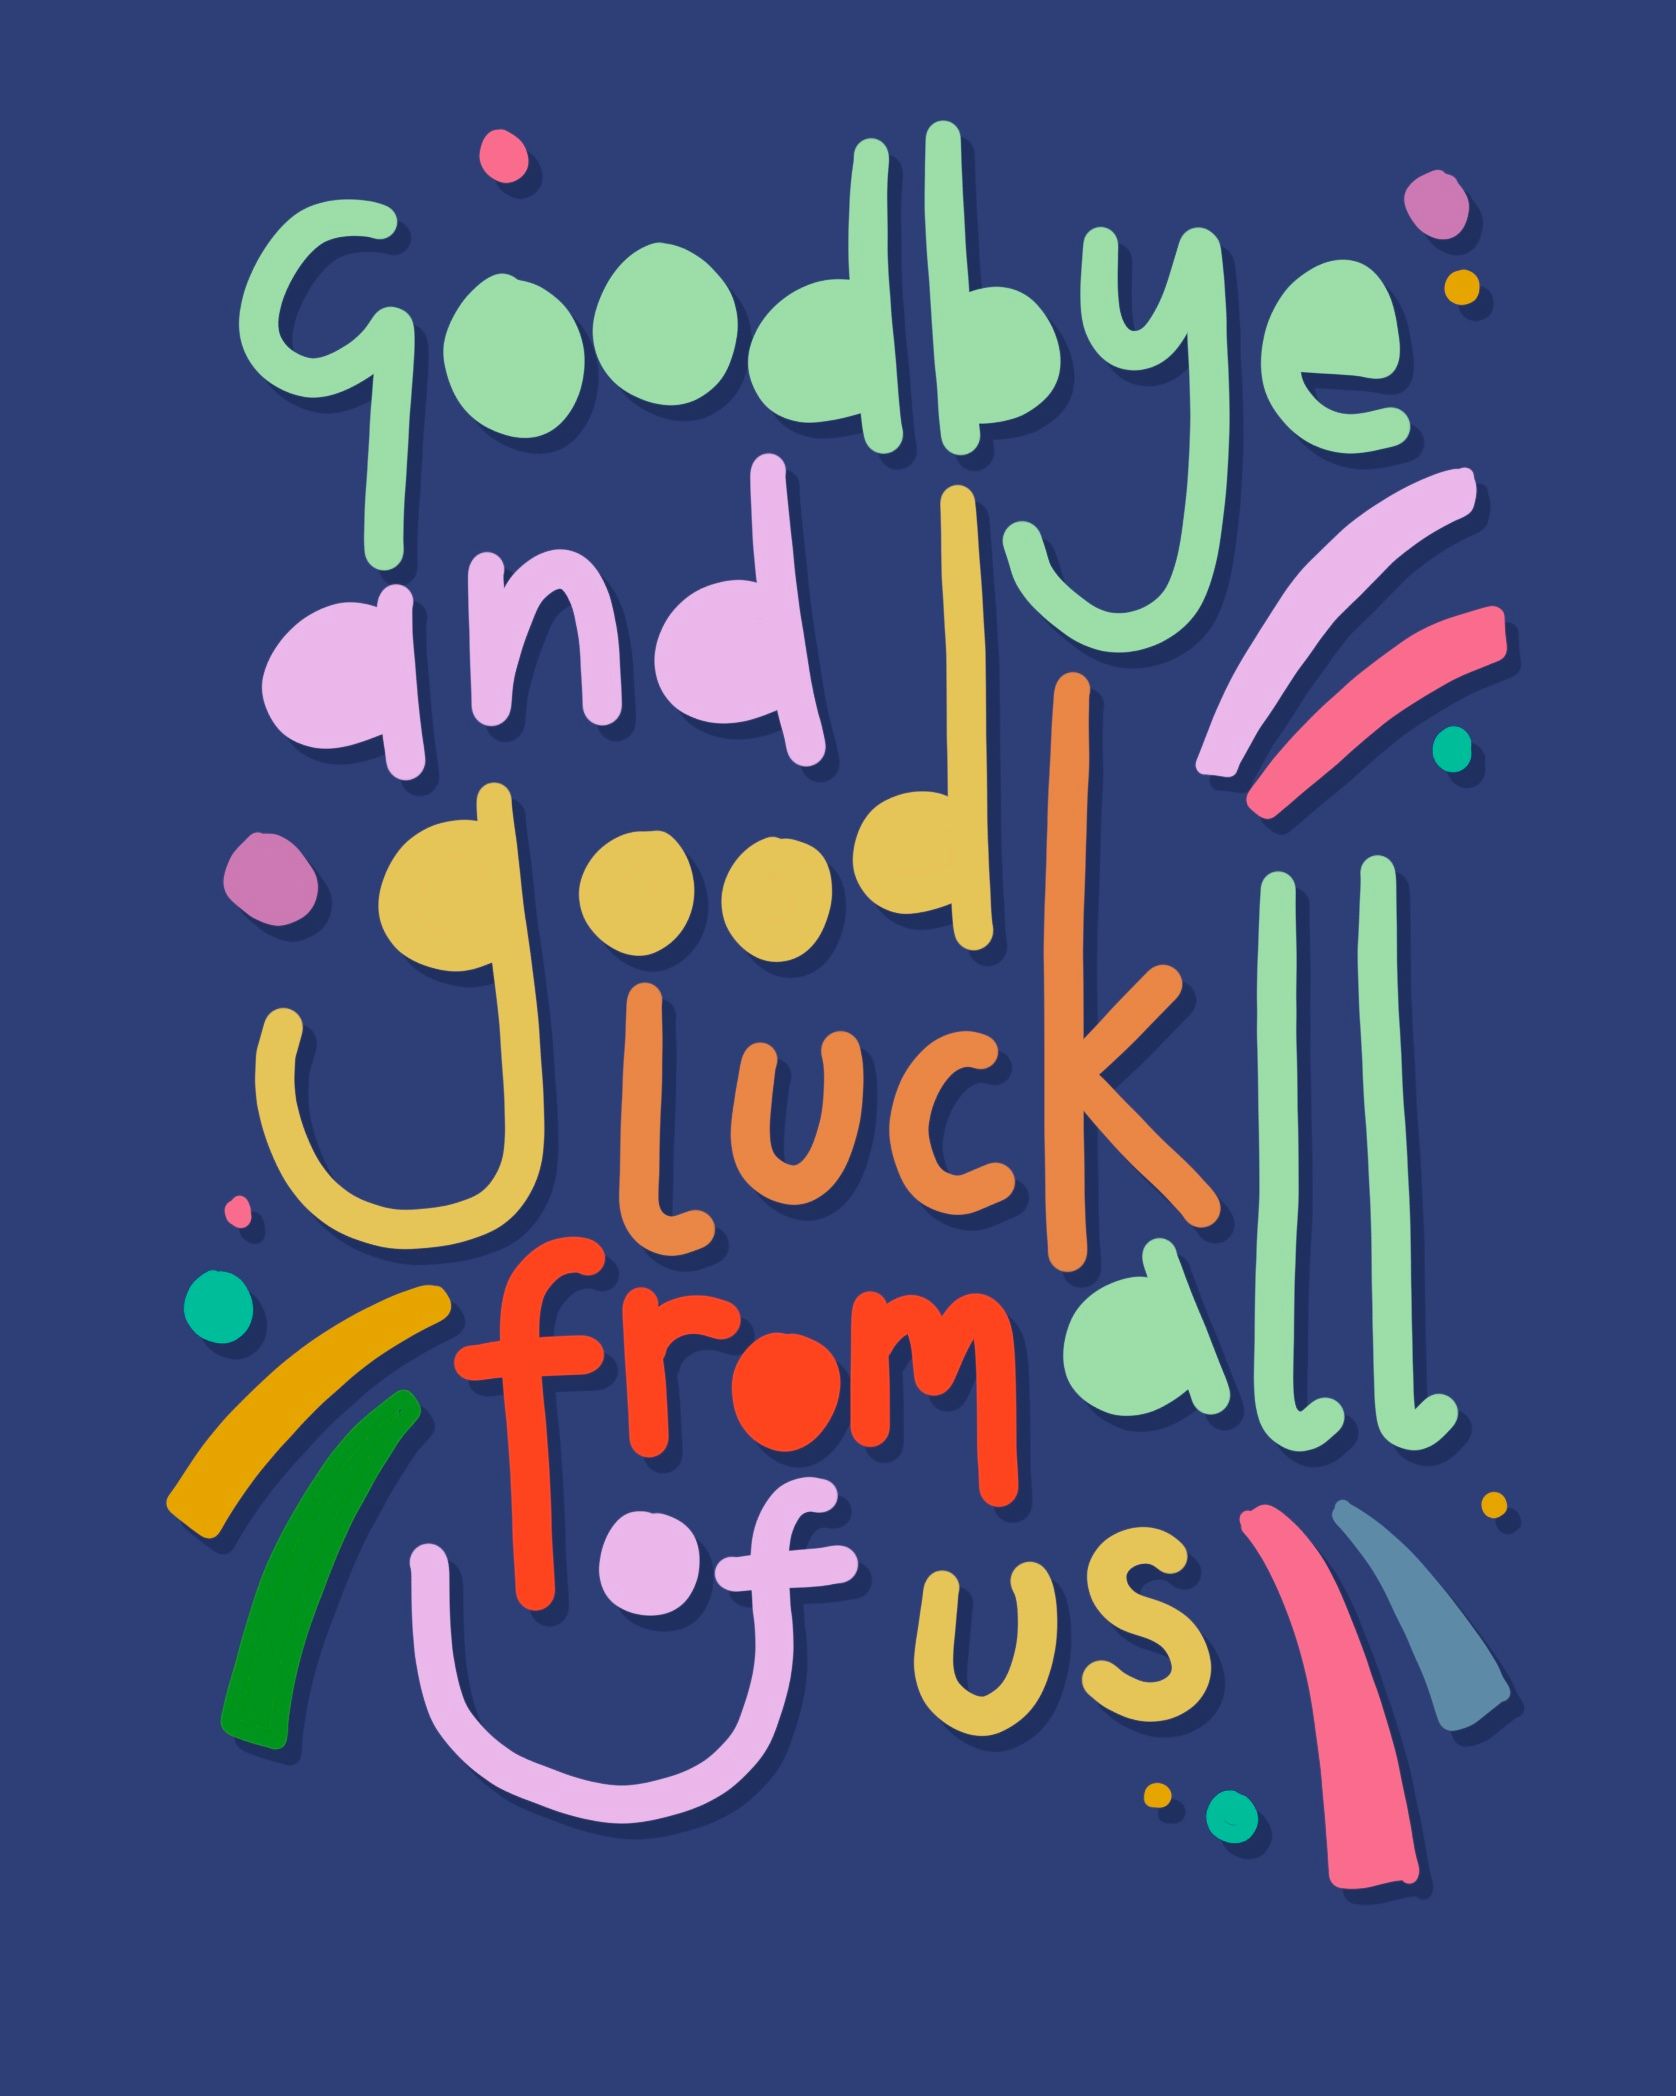 Use goodbye and good luck from all of us card